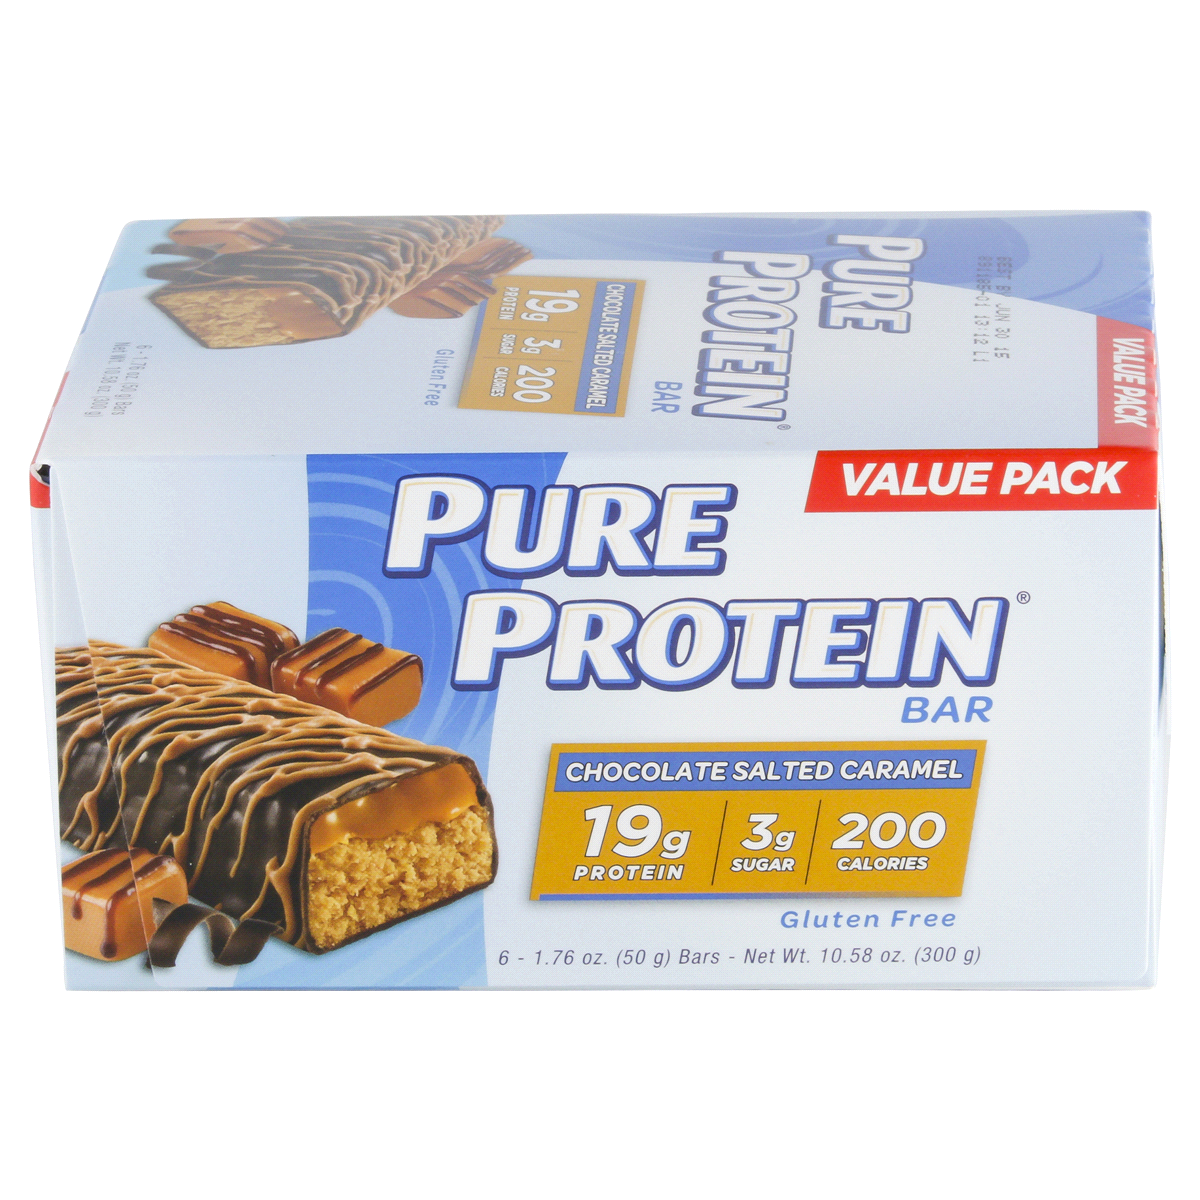 slide 2 of 3, Pure Protein Bar, Chocolate Salted Caramel, Value Pack 6-1.76 Oz Bars, 6 ct; 1.76 oz